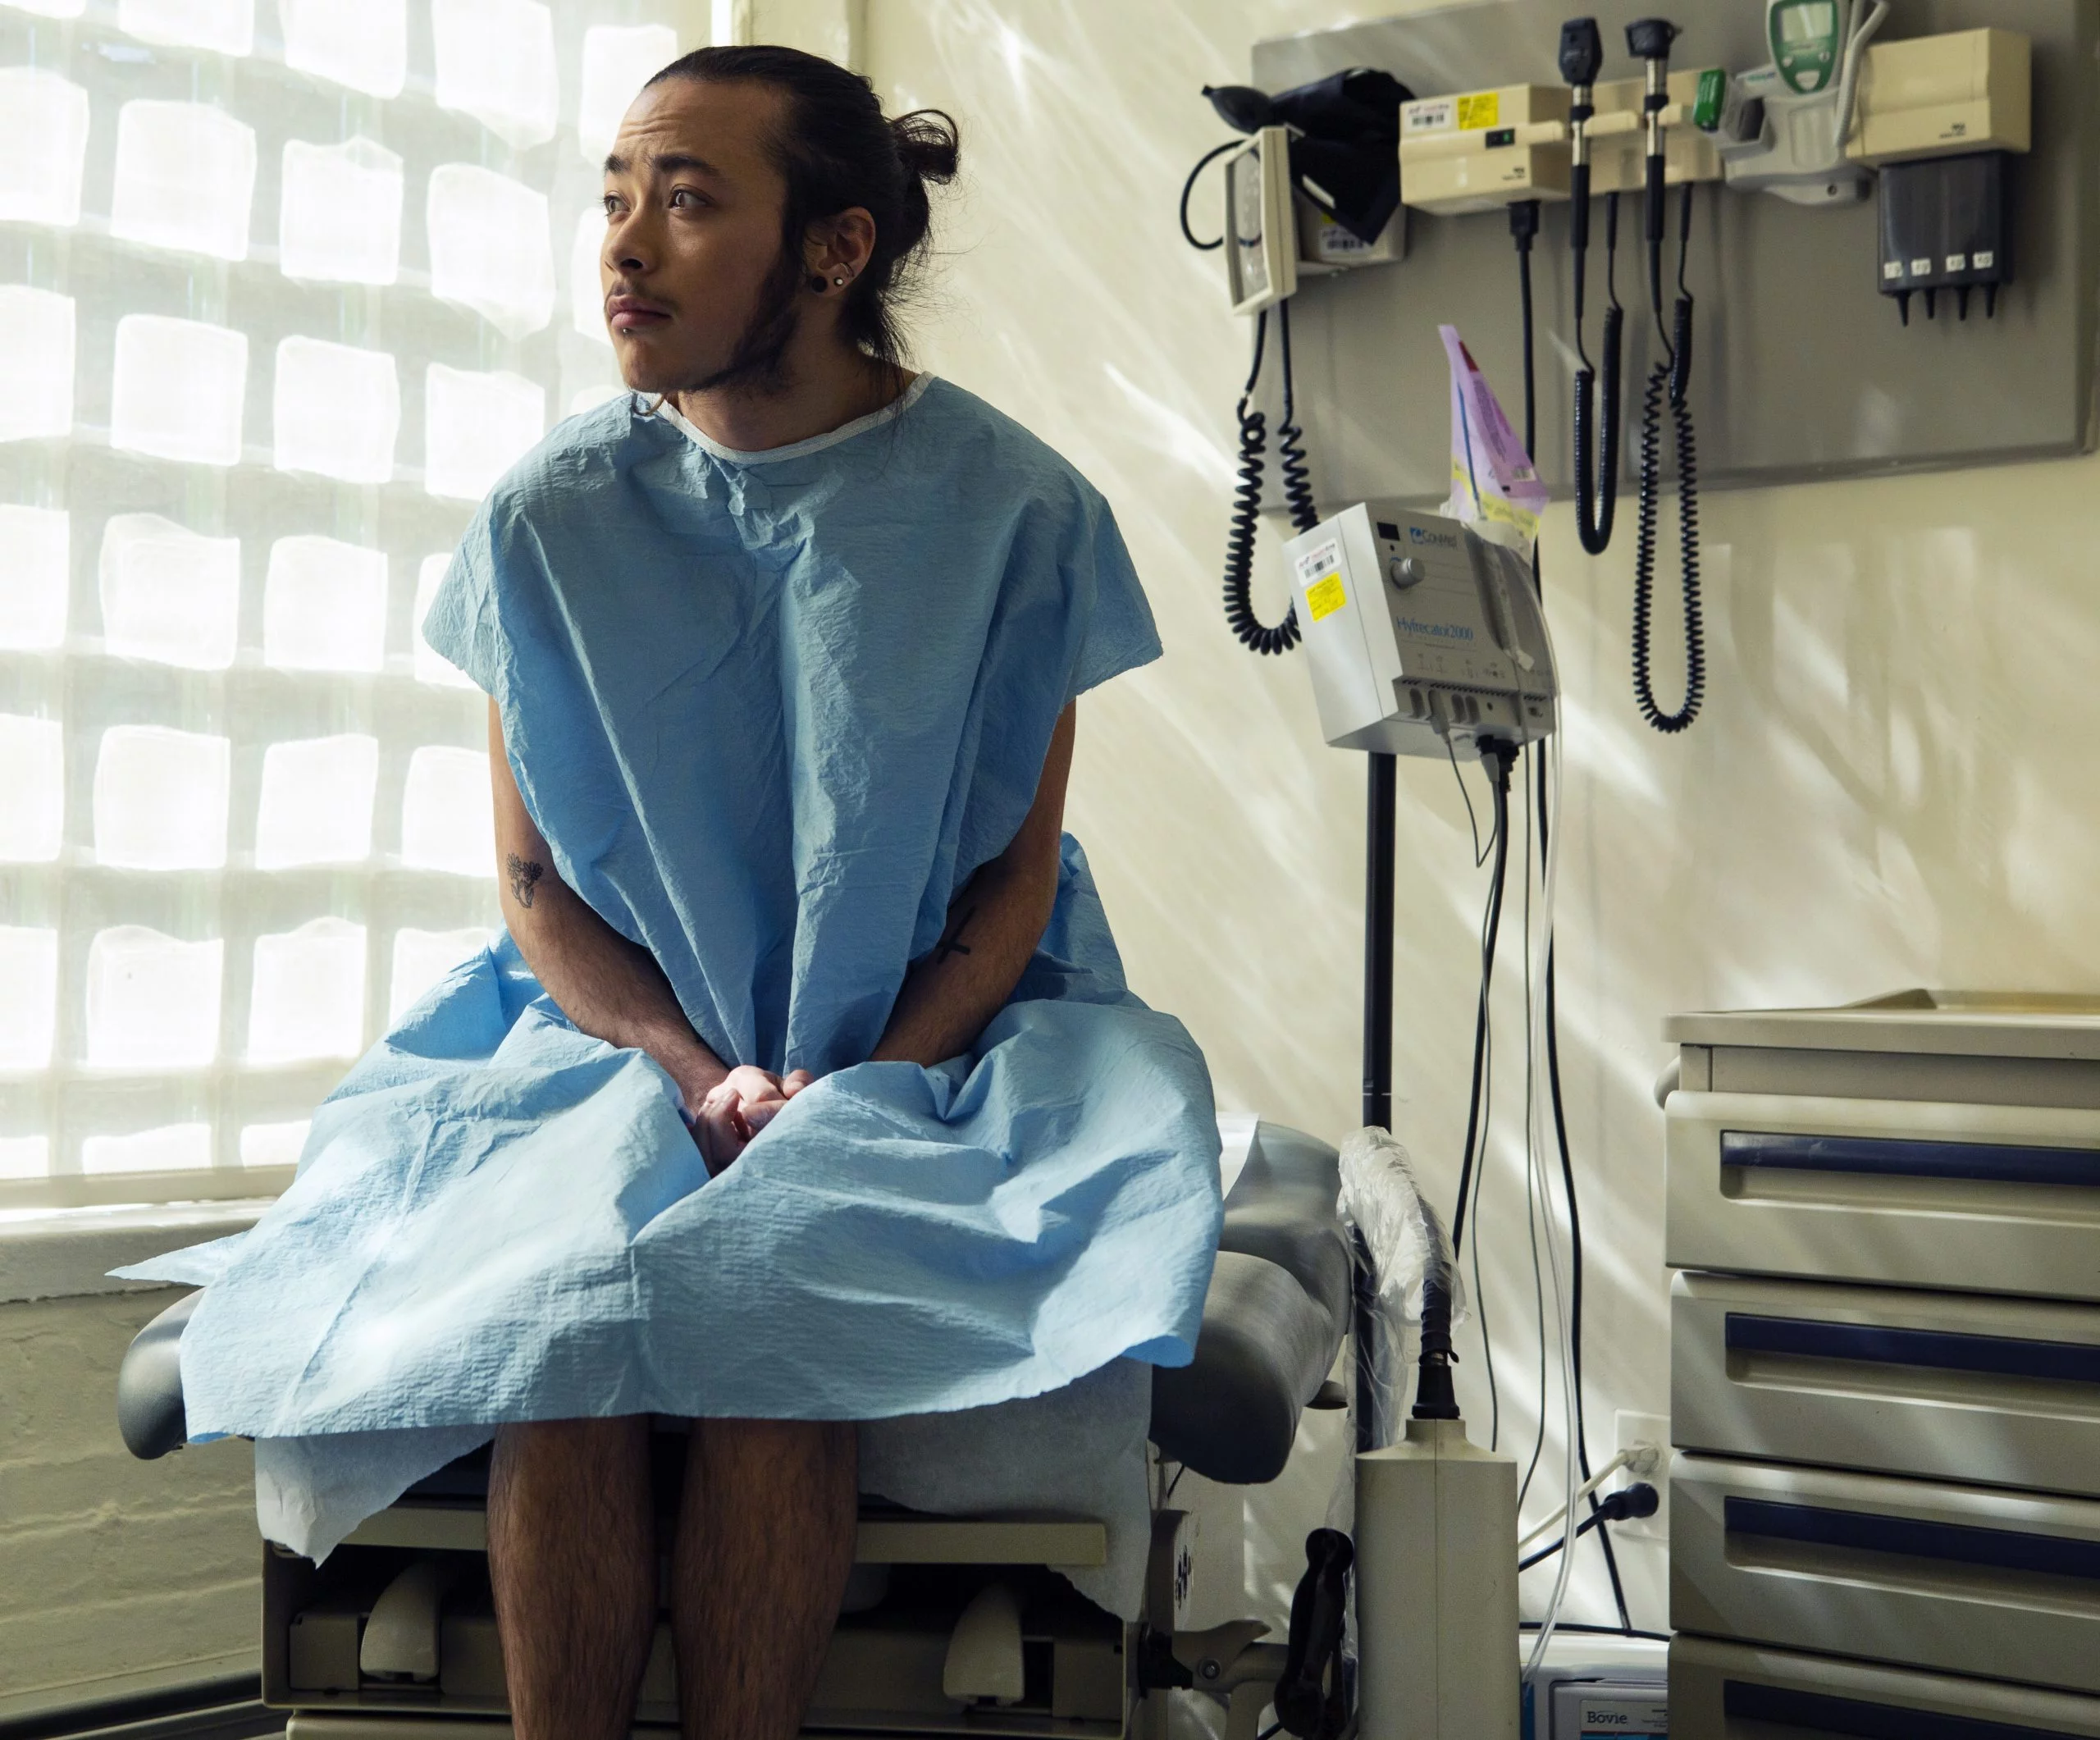 A genderqueer person sitting in a hospital gown